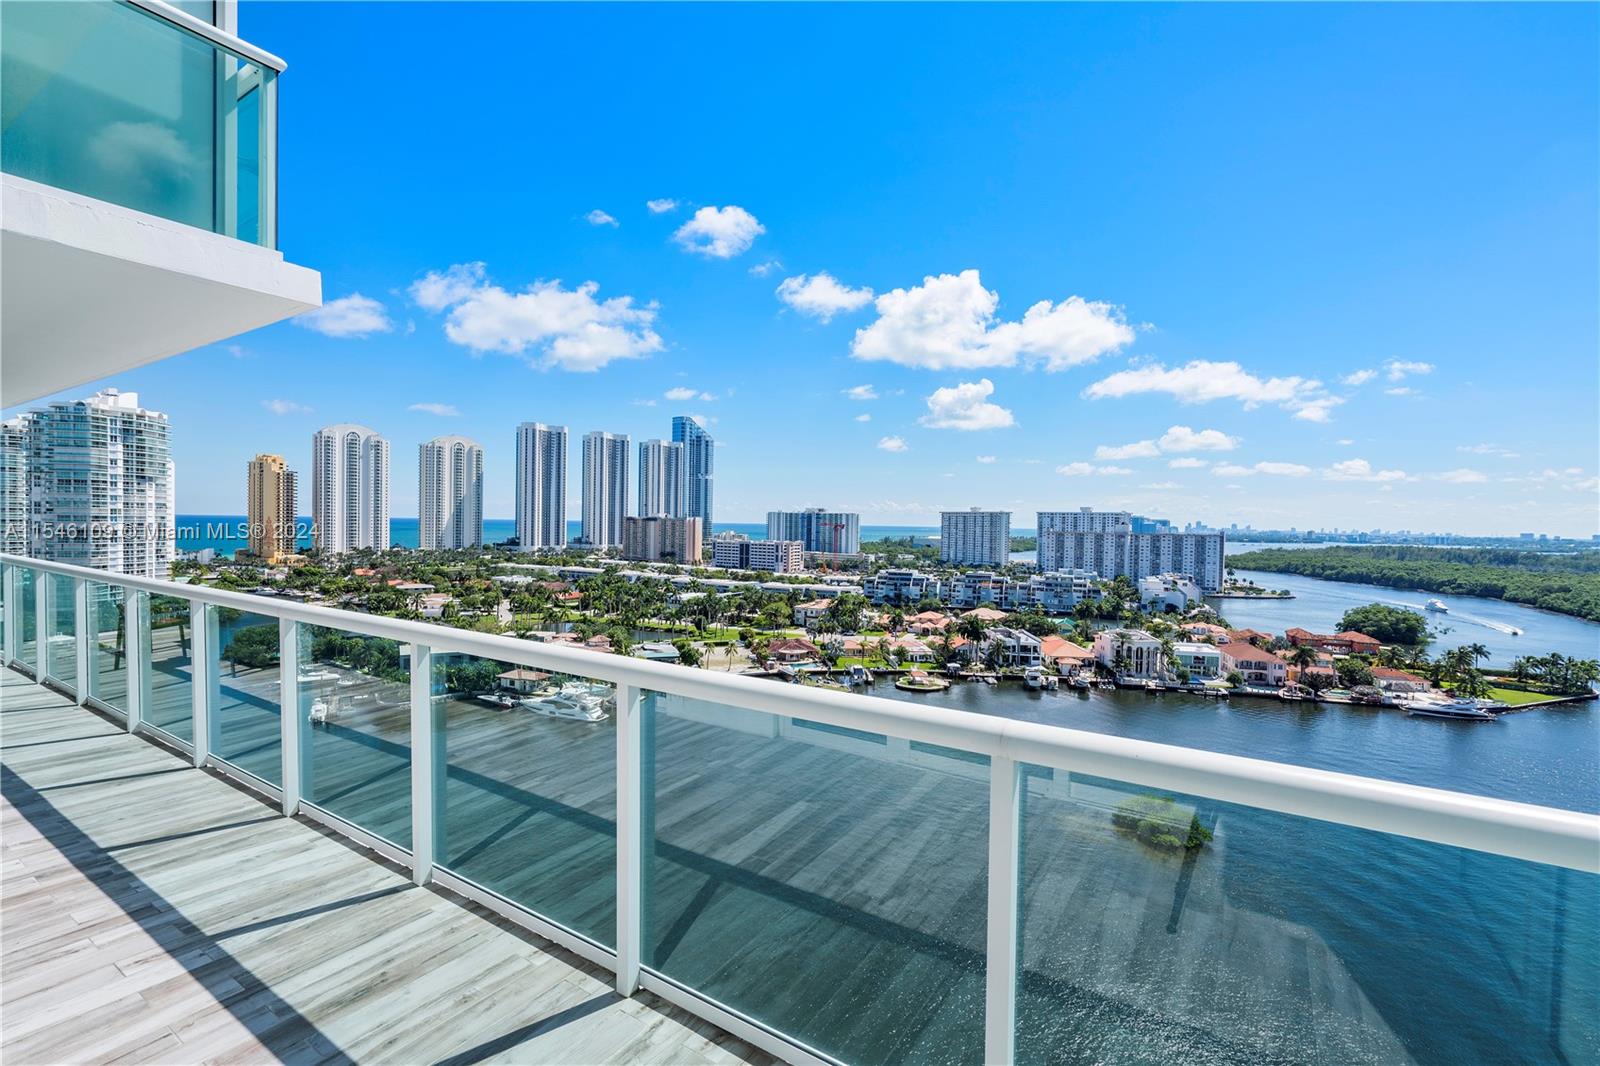 AMAZING NEW OPPORTUNITY at a very saw after split floor plan featuring a large balcony with panoramic Intracoastal views and an extra large walk-in closet in the Master bedroom. The third bedroom is a Den transformed into a guest room with 2 single beds, a full bathroom, and a wardrobe - no window ( video tour ). This luxury 3 Bedrooms/3 bath is fully furnished by Crate & Barrel, The living room features lots of natural light. Full-Service building, 24hrs front desk, gym, TENNIS COURT, a pool deck with lounge, bar, and large Pool, Marina, and Valet. Walking distance to Sunny Isles Beach, near Aventura Mall, Bal Harbour Mall, best schools, and world-class restaurants. Featuring a resort-style pool deck with a full-service private Marina and boat with wet and dry slips, for all residents